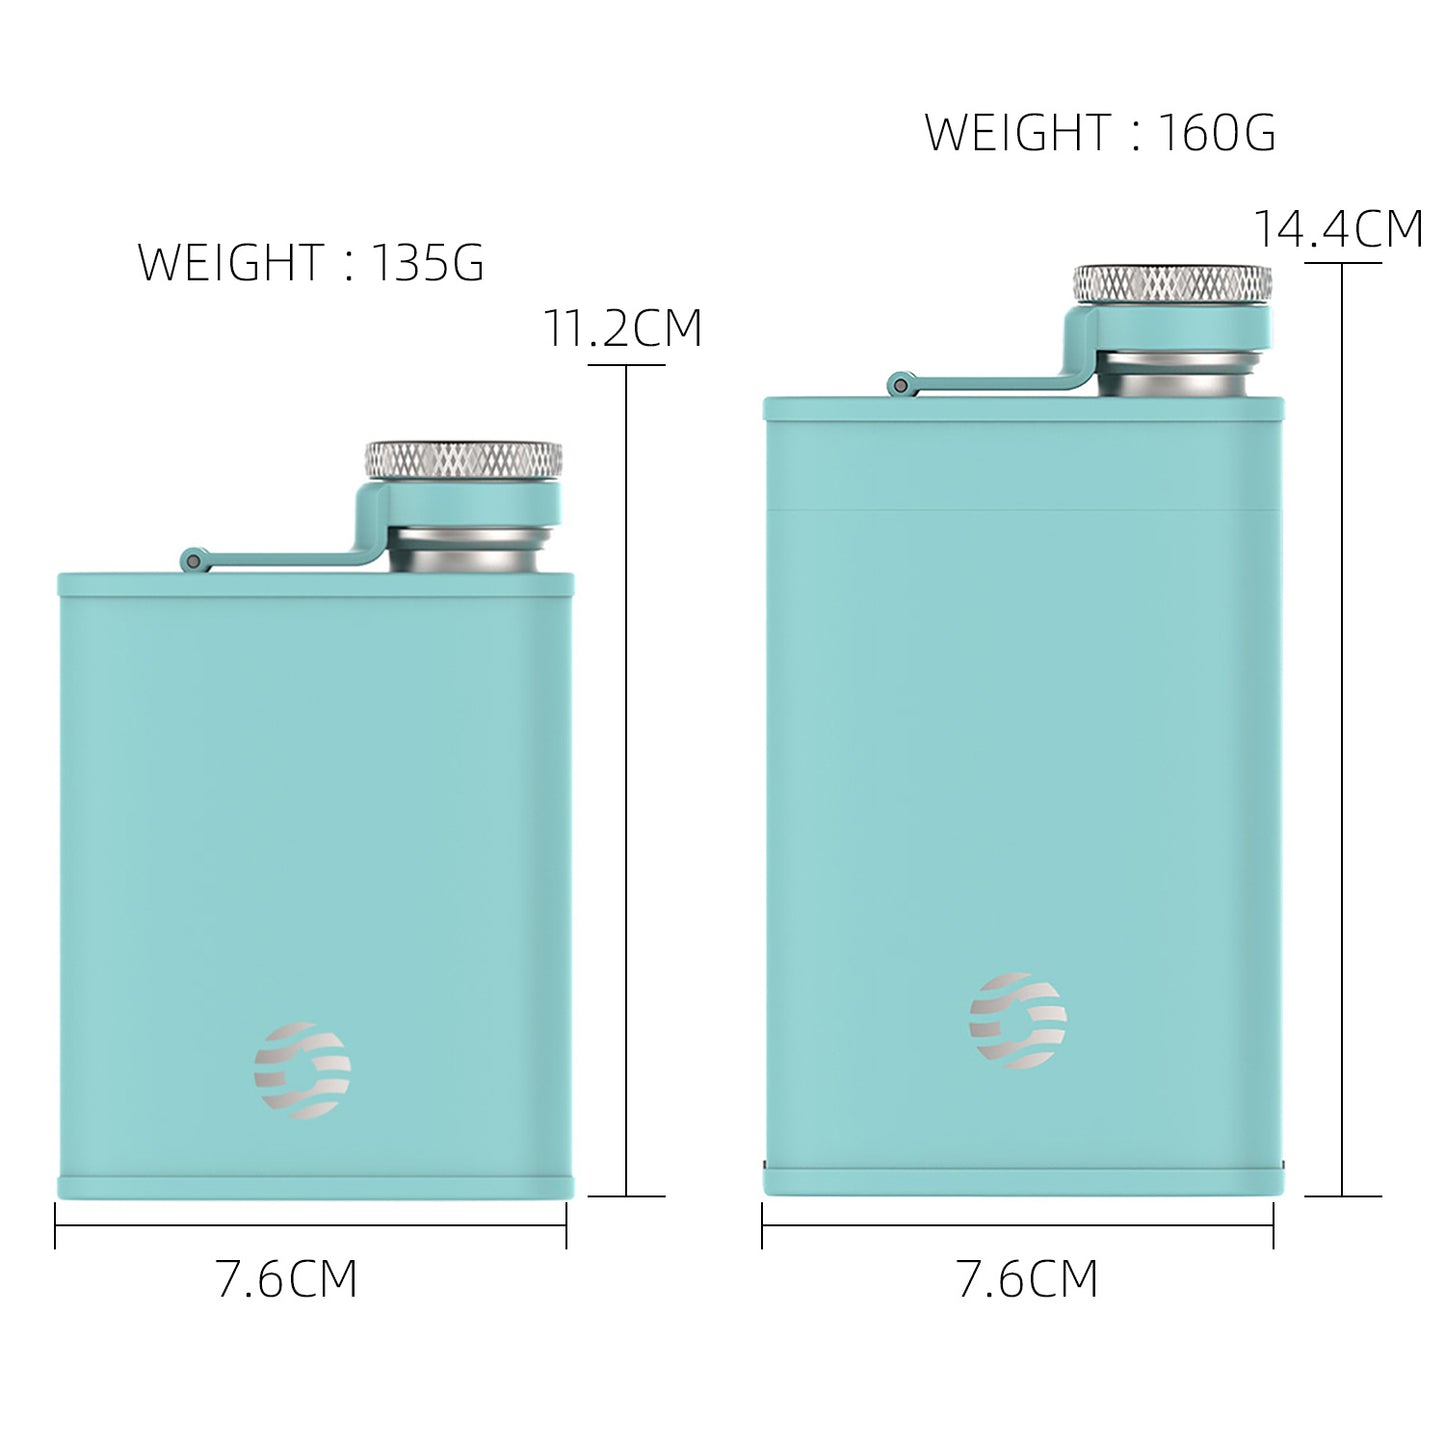 Healter Men's Hip Flask;  Portable Pocket Stainless Steel Flask;  Whiskey Flask for Outdoor Camping Climbing Hiking Picnic